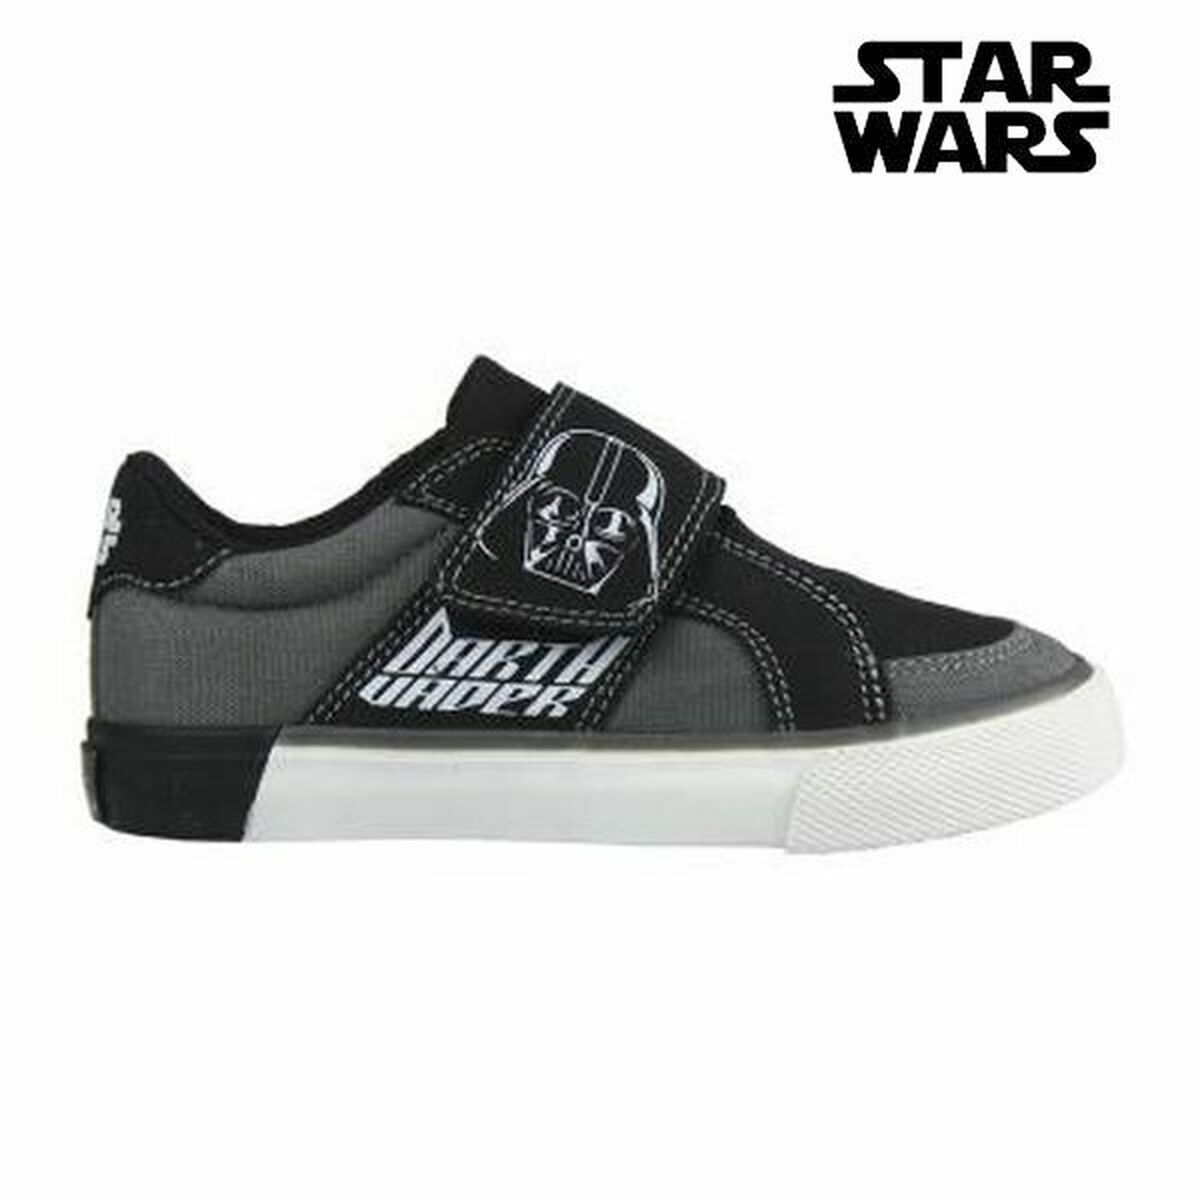 Chaussures casual Star Wars 4868 (taille 33)